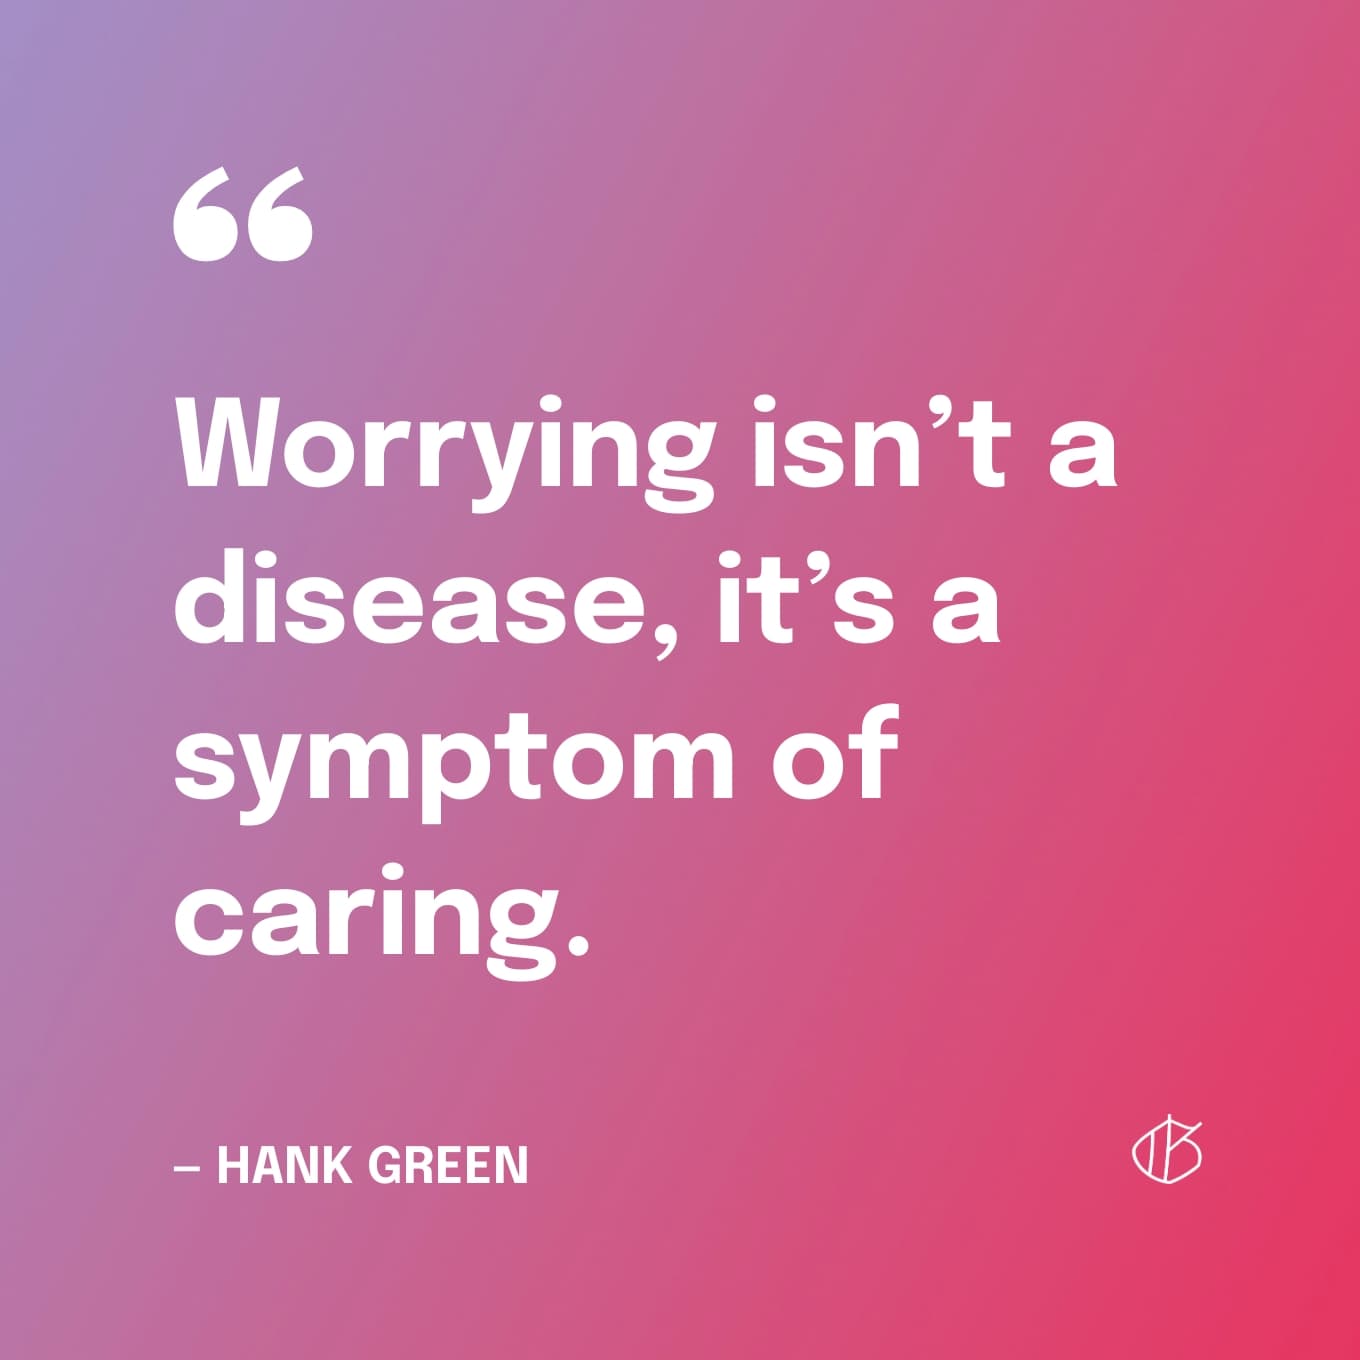 Quote: “Worrying isn’t a disease, it’s a symptom of caring.” — Hank Green